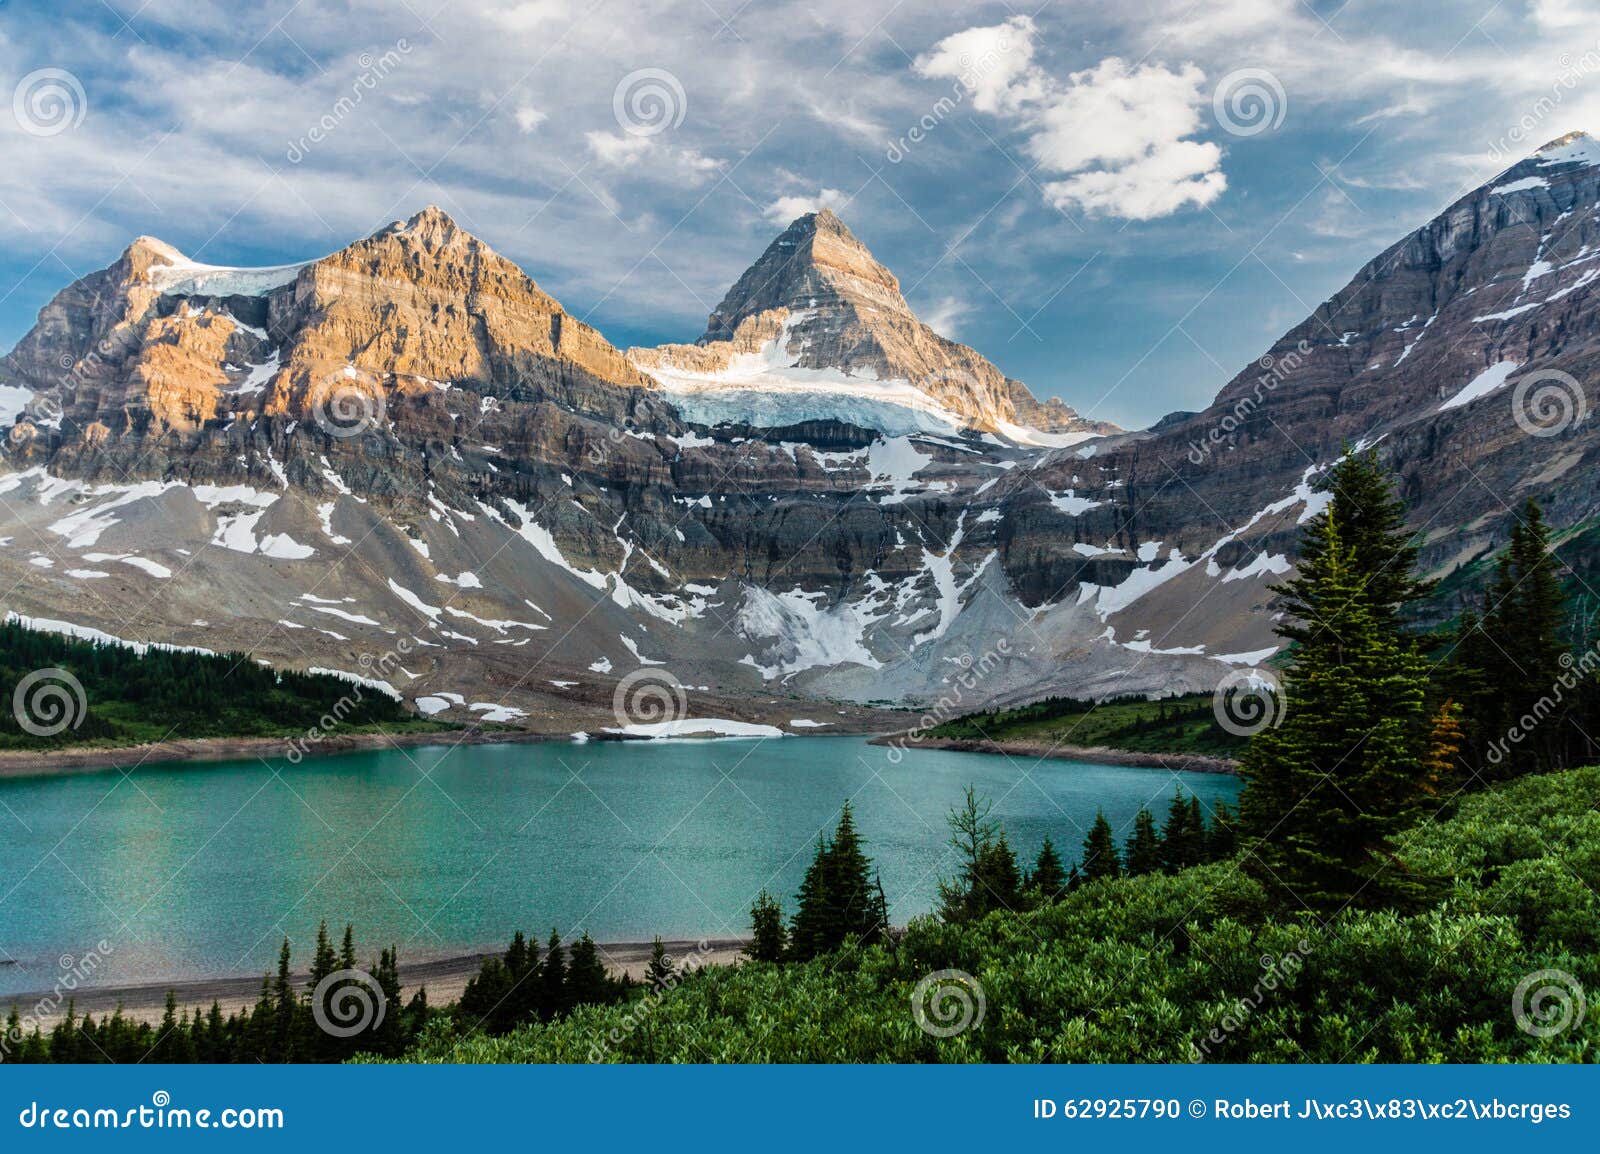 mount assiniboine with lake